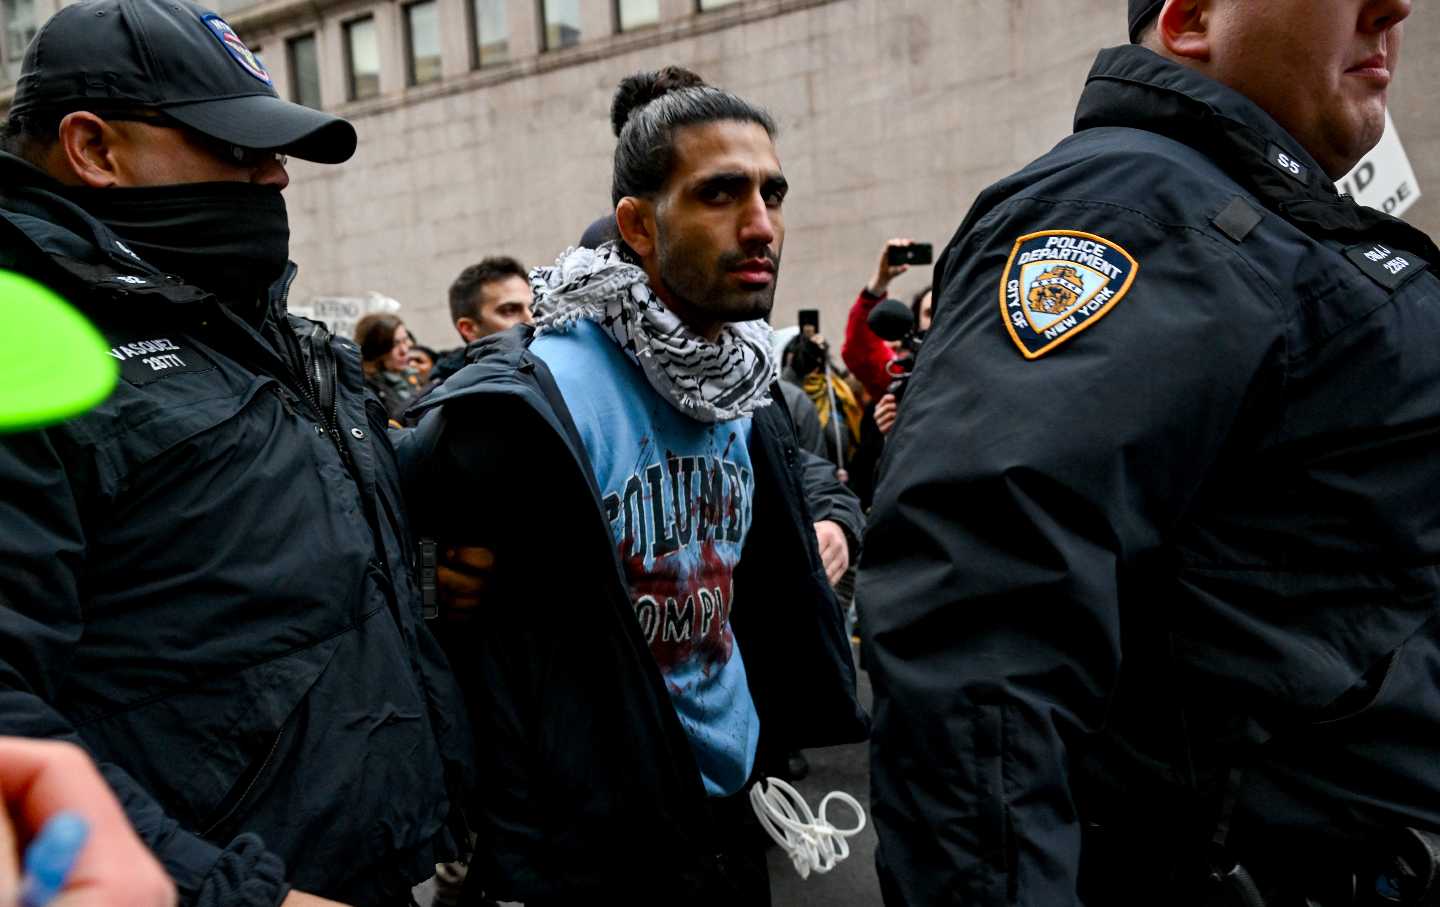 A protester is arrested at a Columbia University demonstration.